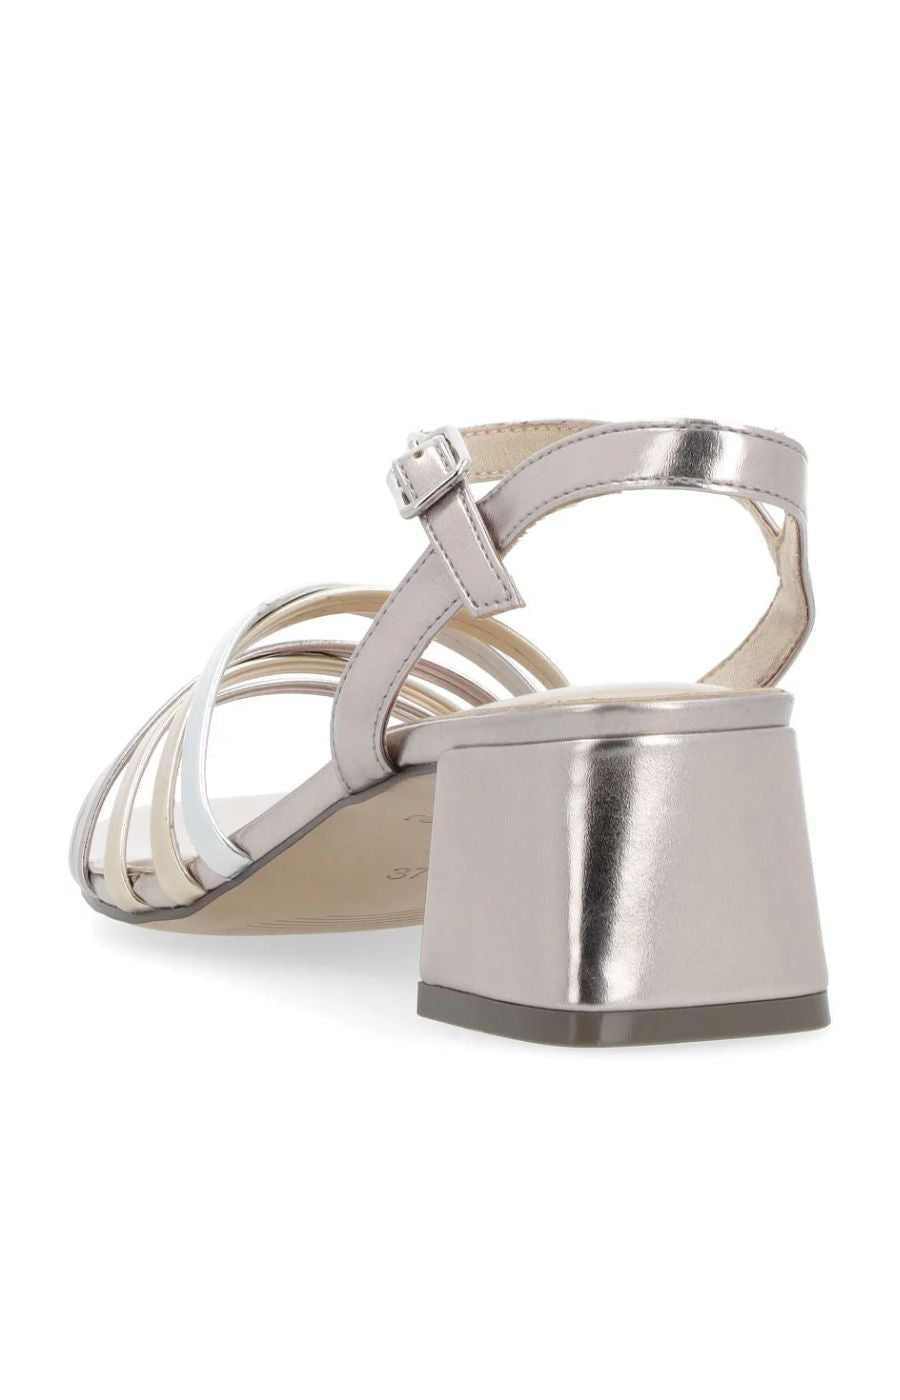 Remonte Strappy Sandal in Metallic